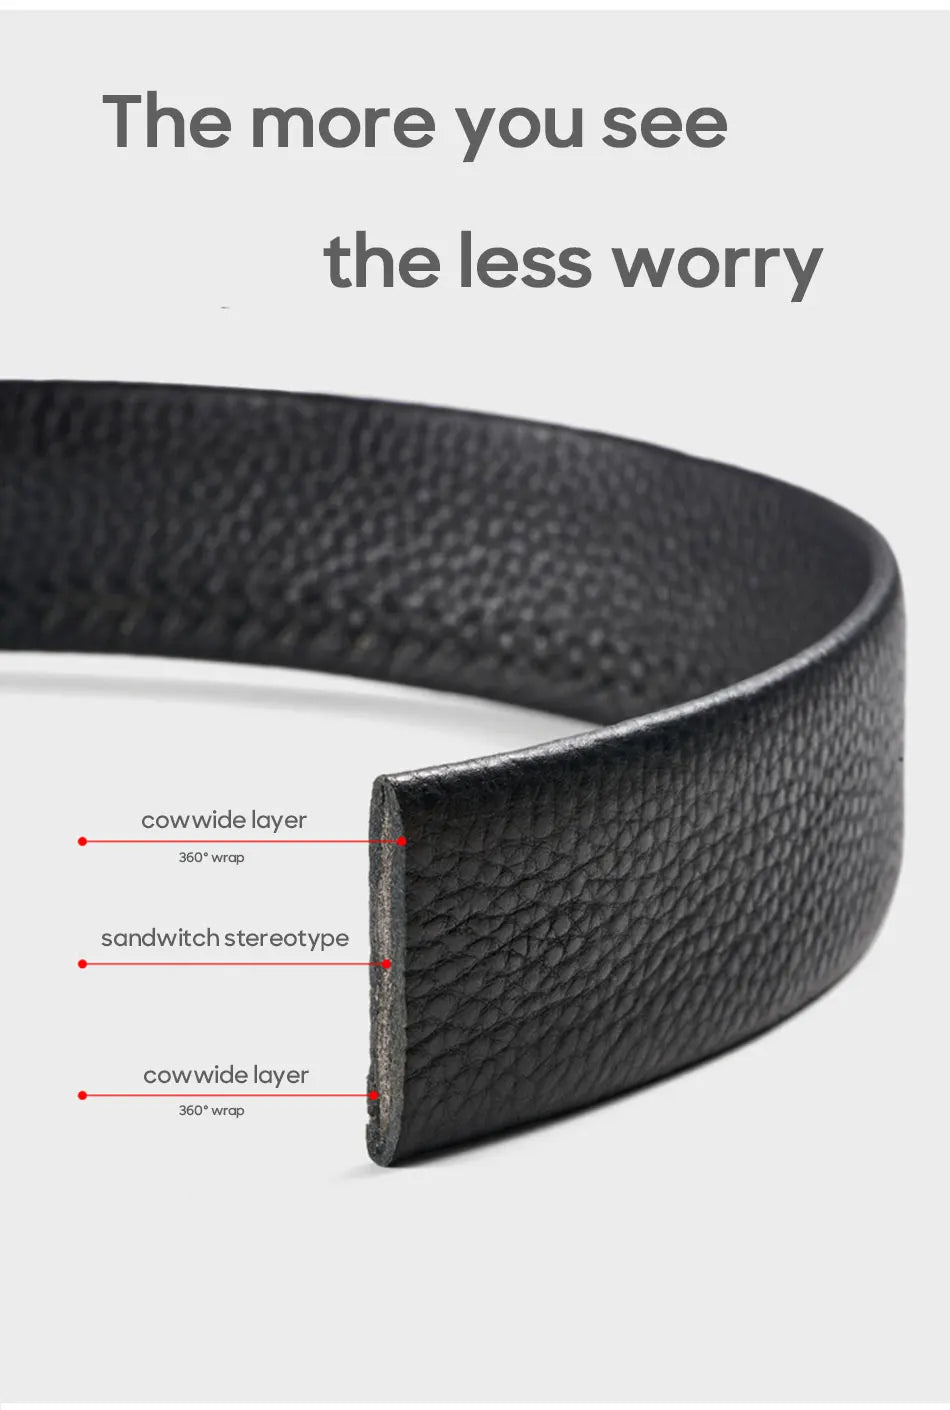 Men Leather Belt with Metal Automatic Buckle High Quality Luxury Belts Men Male Work Business Black Cowskin Strap Gift Present